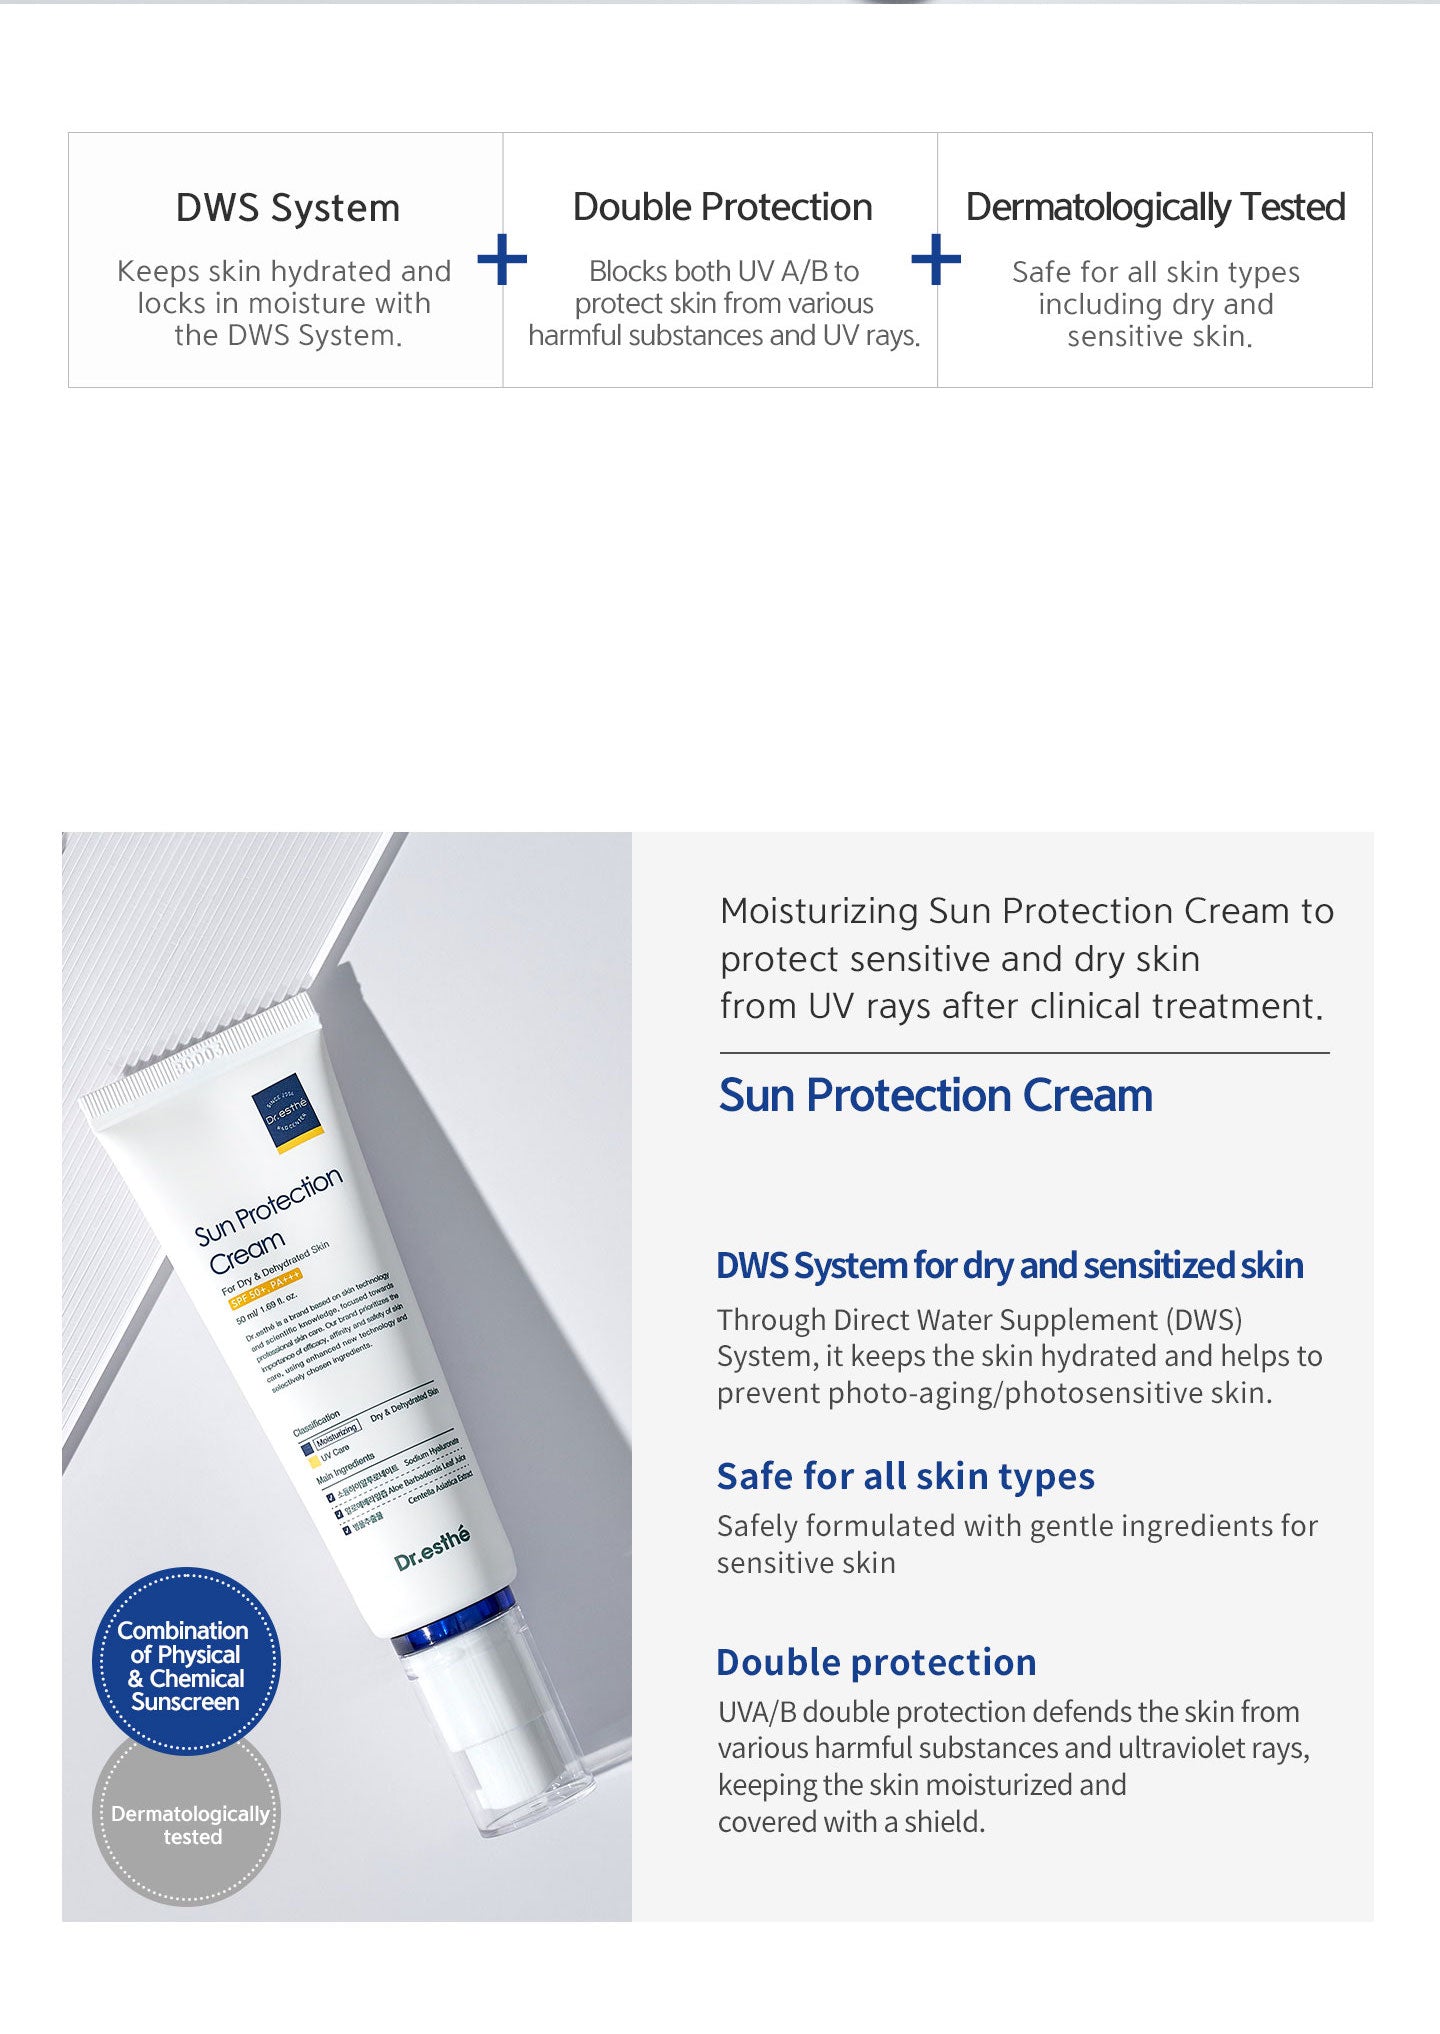 UVA/UVB double protection defends the skin from various harmful substances and ultraviolet rays, keeping the skin moisturized and covered with a shield. Dermatologically tested. DWS System. Moisturizing sun protection cream to protect sensitive/dry skin.